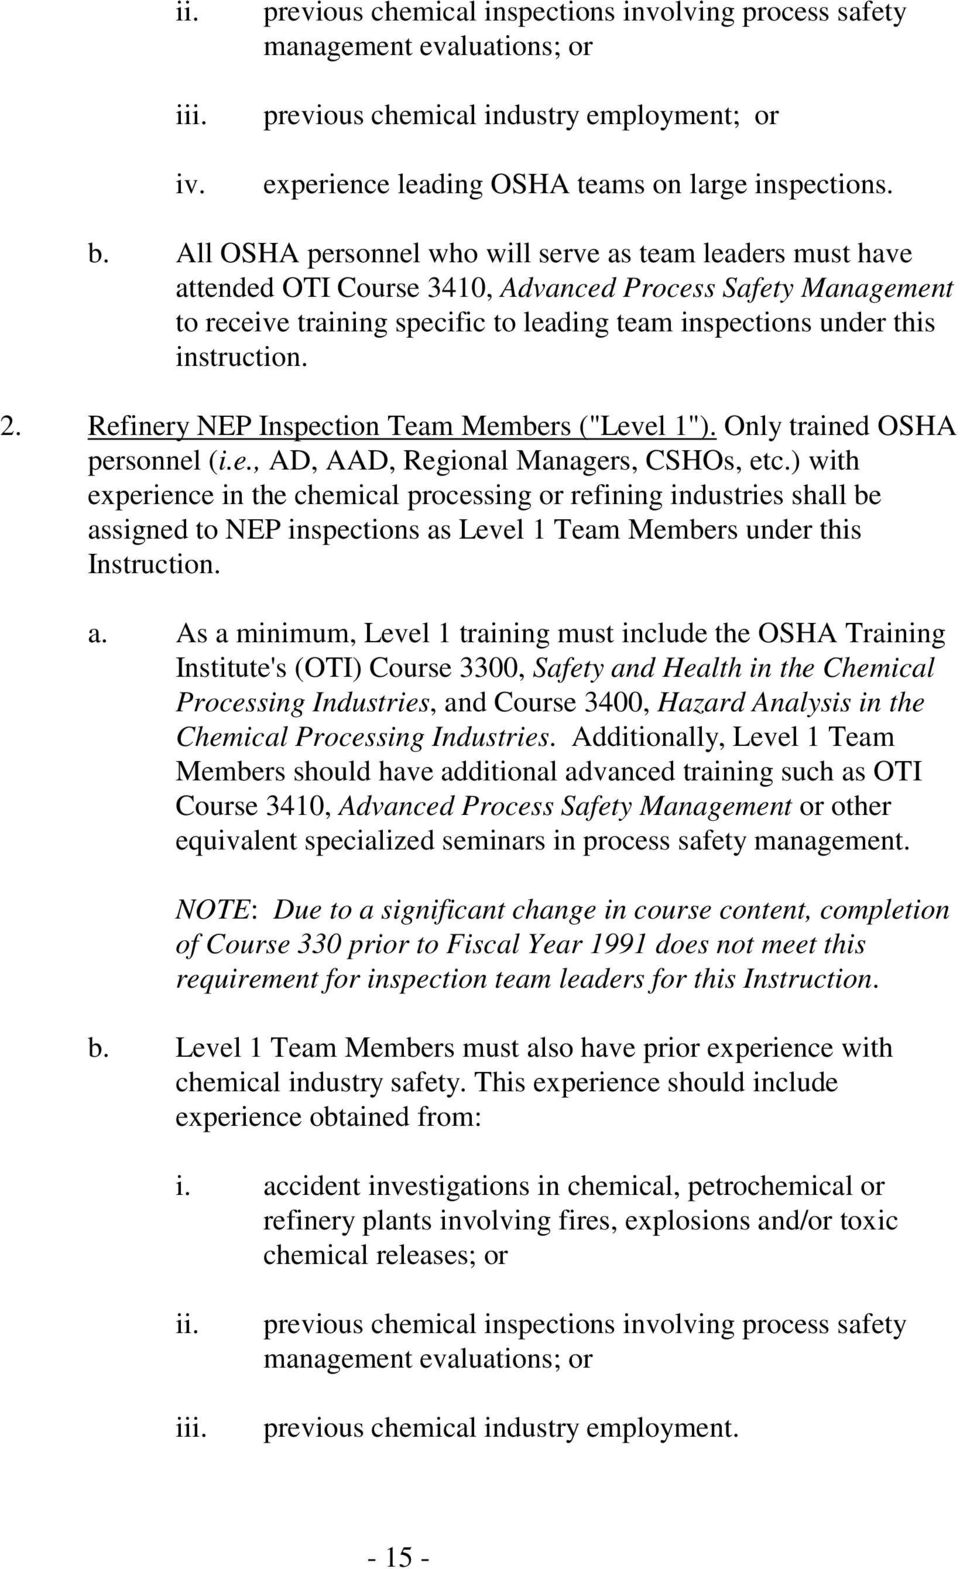 instruction. 2. Refinery NEP Inspection Team Members ("Level 1"). Only trained OSHA personnel (i.e., AD, AAD, Regional Managers, CSHOs, etc.